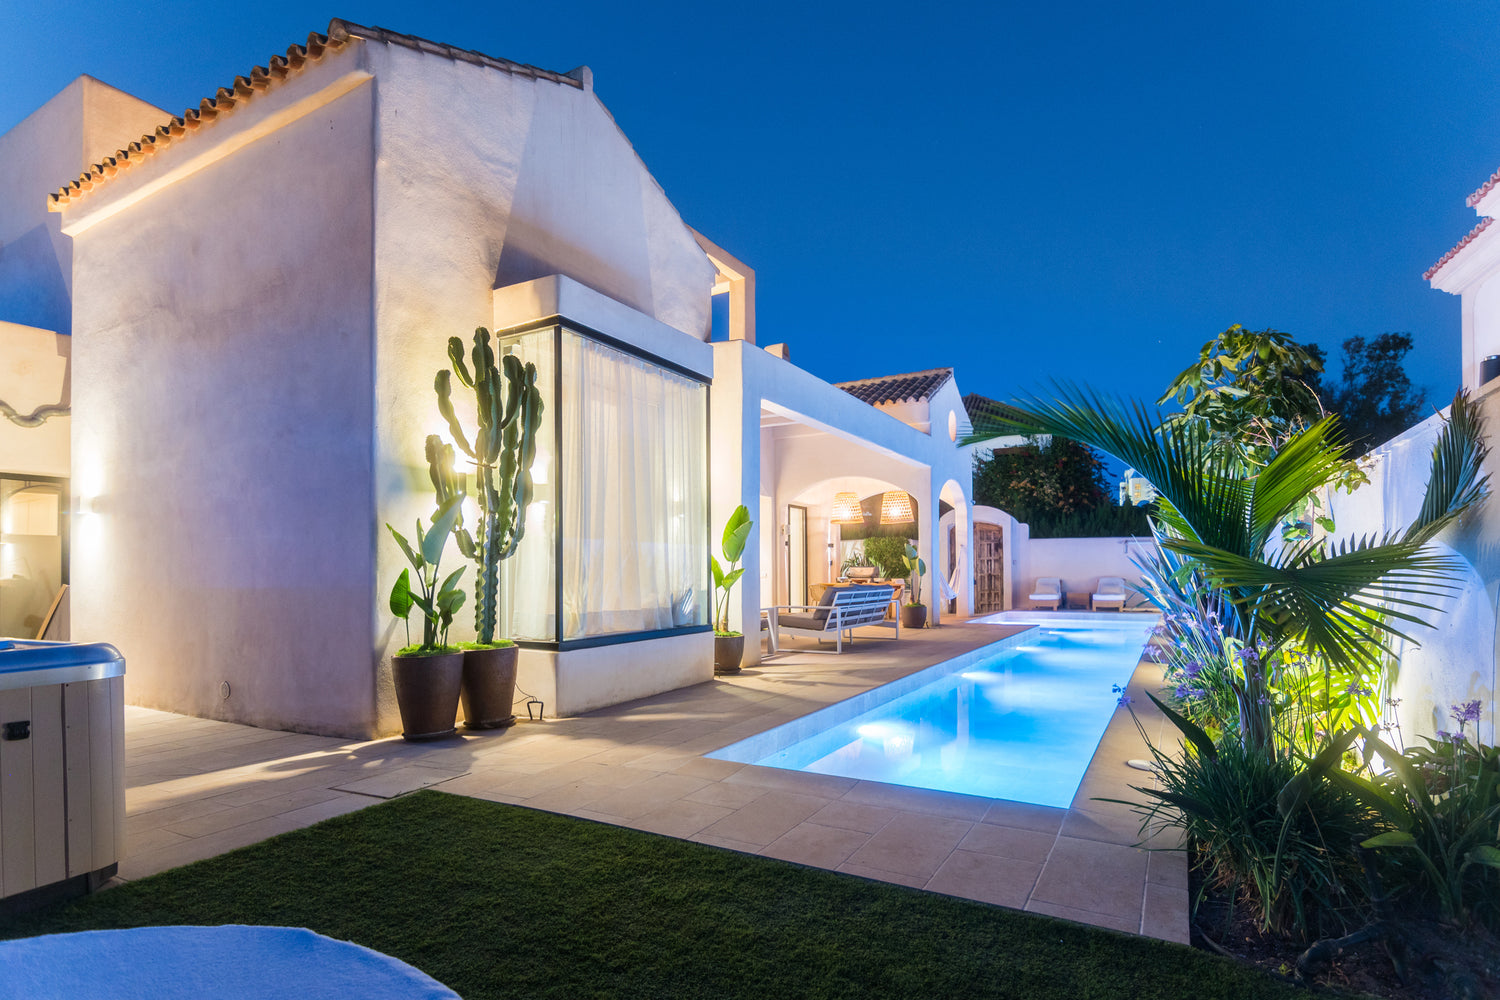 South facede area of Villa, Marbella luxury Beach House short term rental, located on the beach side at Marbella´s exclusive Golden Mile just steps from the sea 